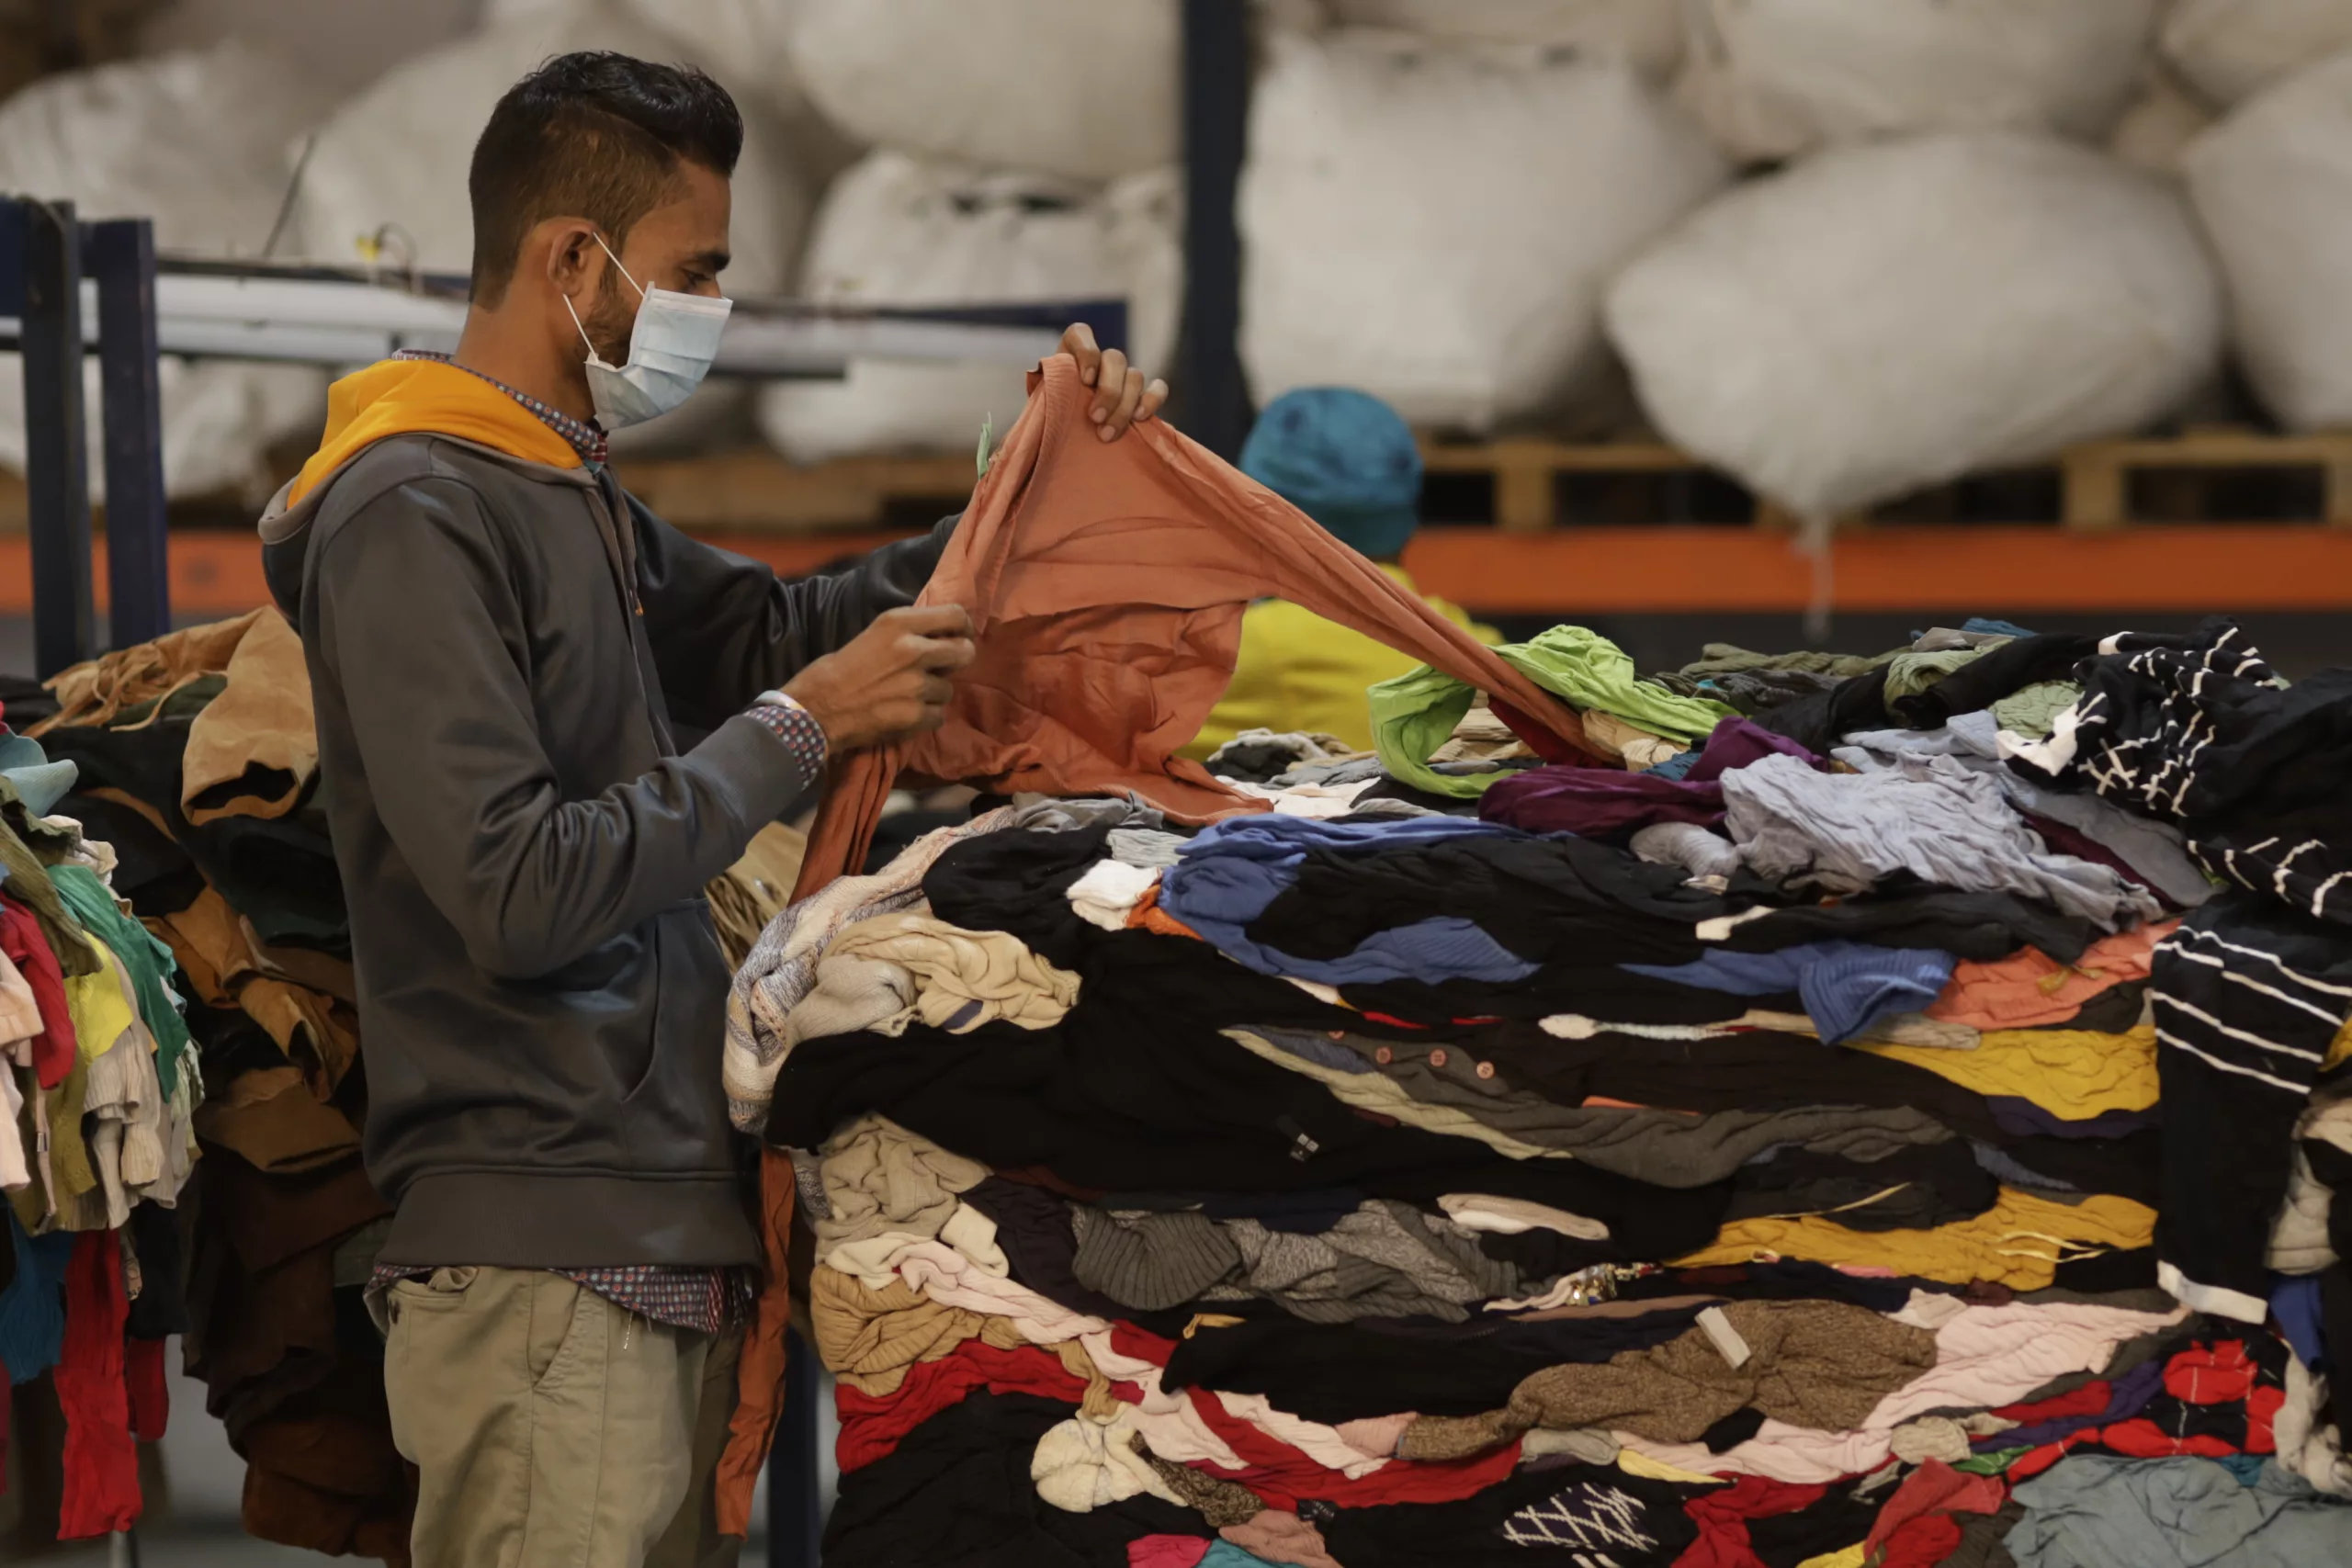 A man grading goods in a warehouse